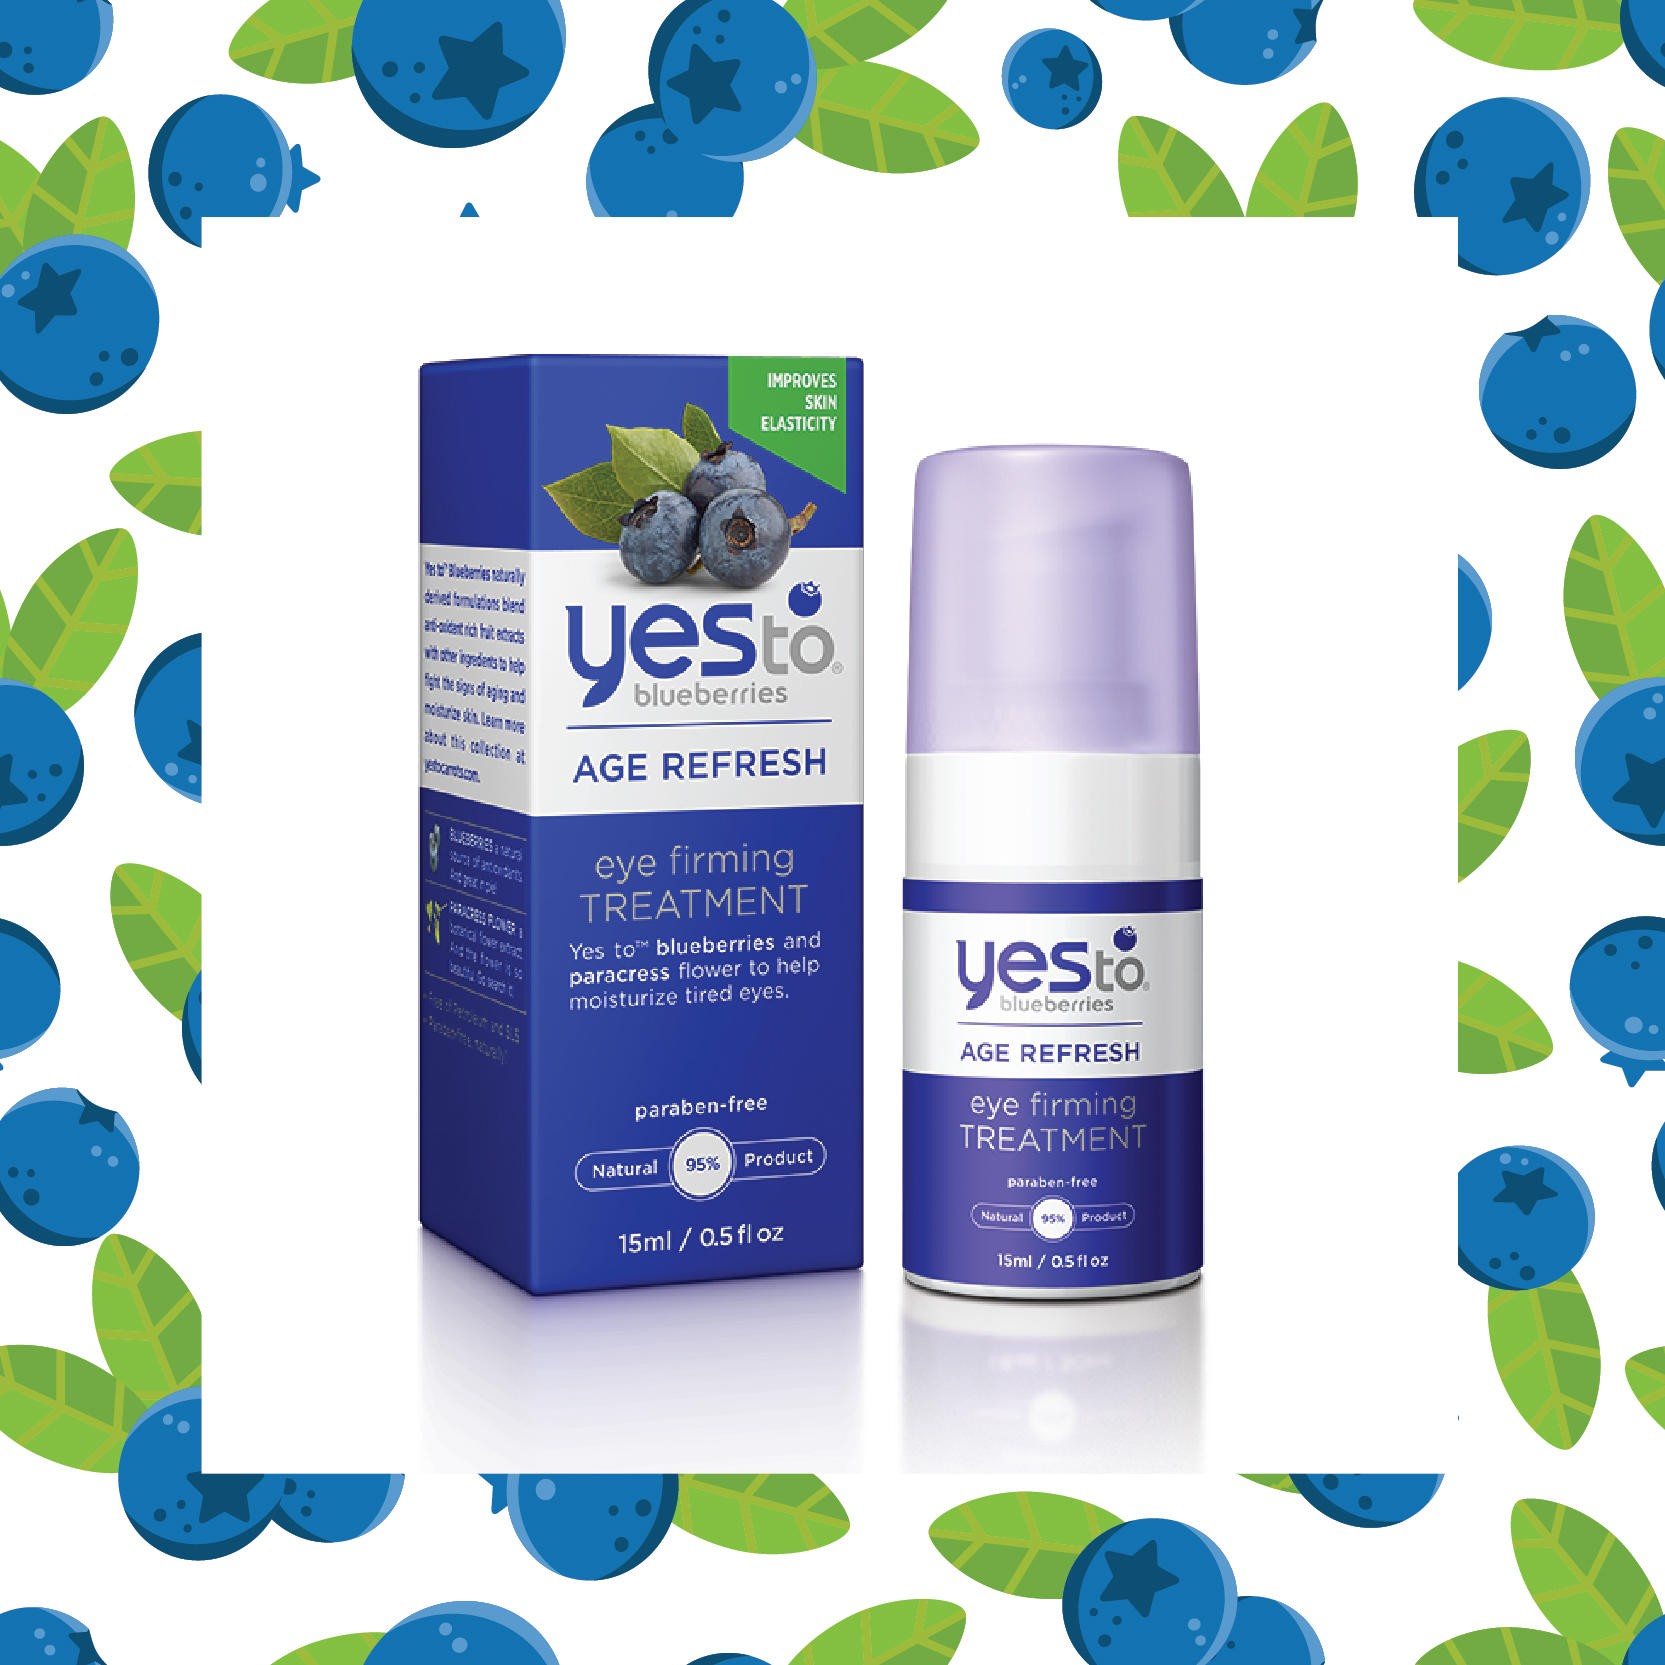 Yes to blueberries eye firming treatment product image